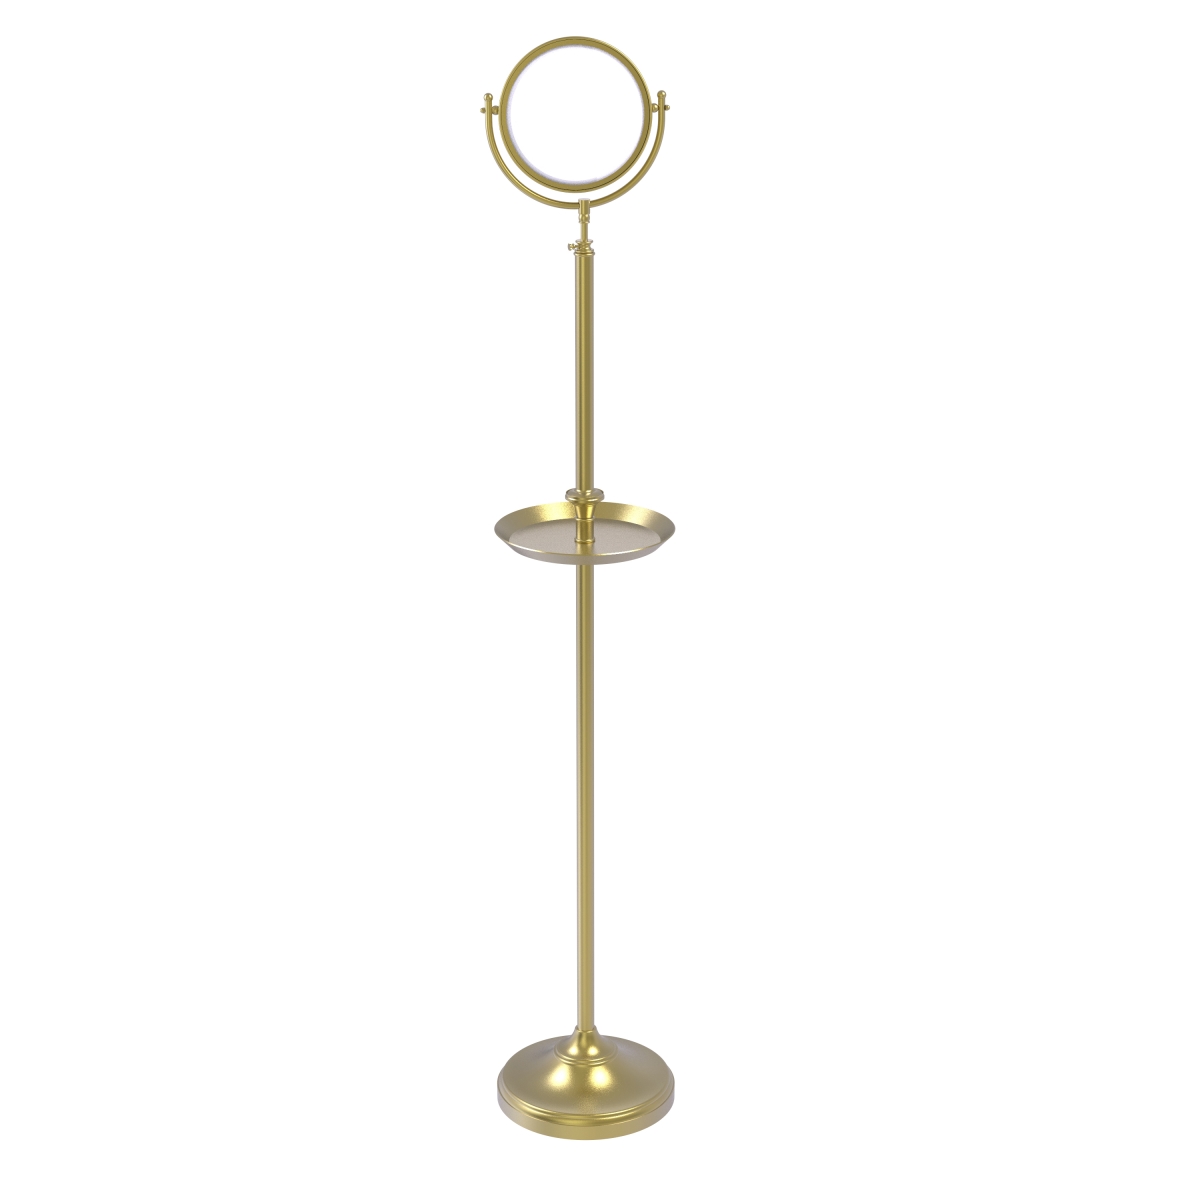 Dmf-3-2x-sbr Floor Standing Make-up Mirror 8 In. Dia. With 2x Magnification & Shaving Tray, Satin Brass